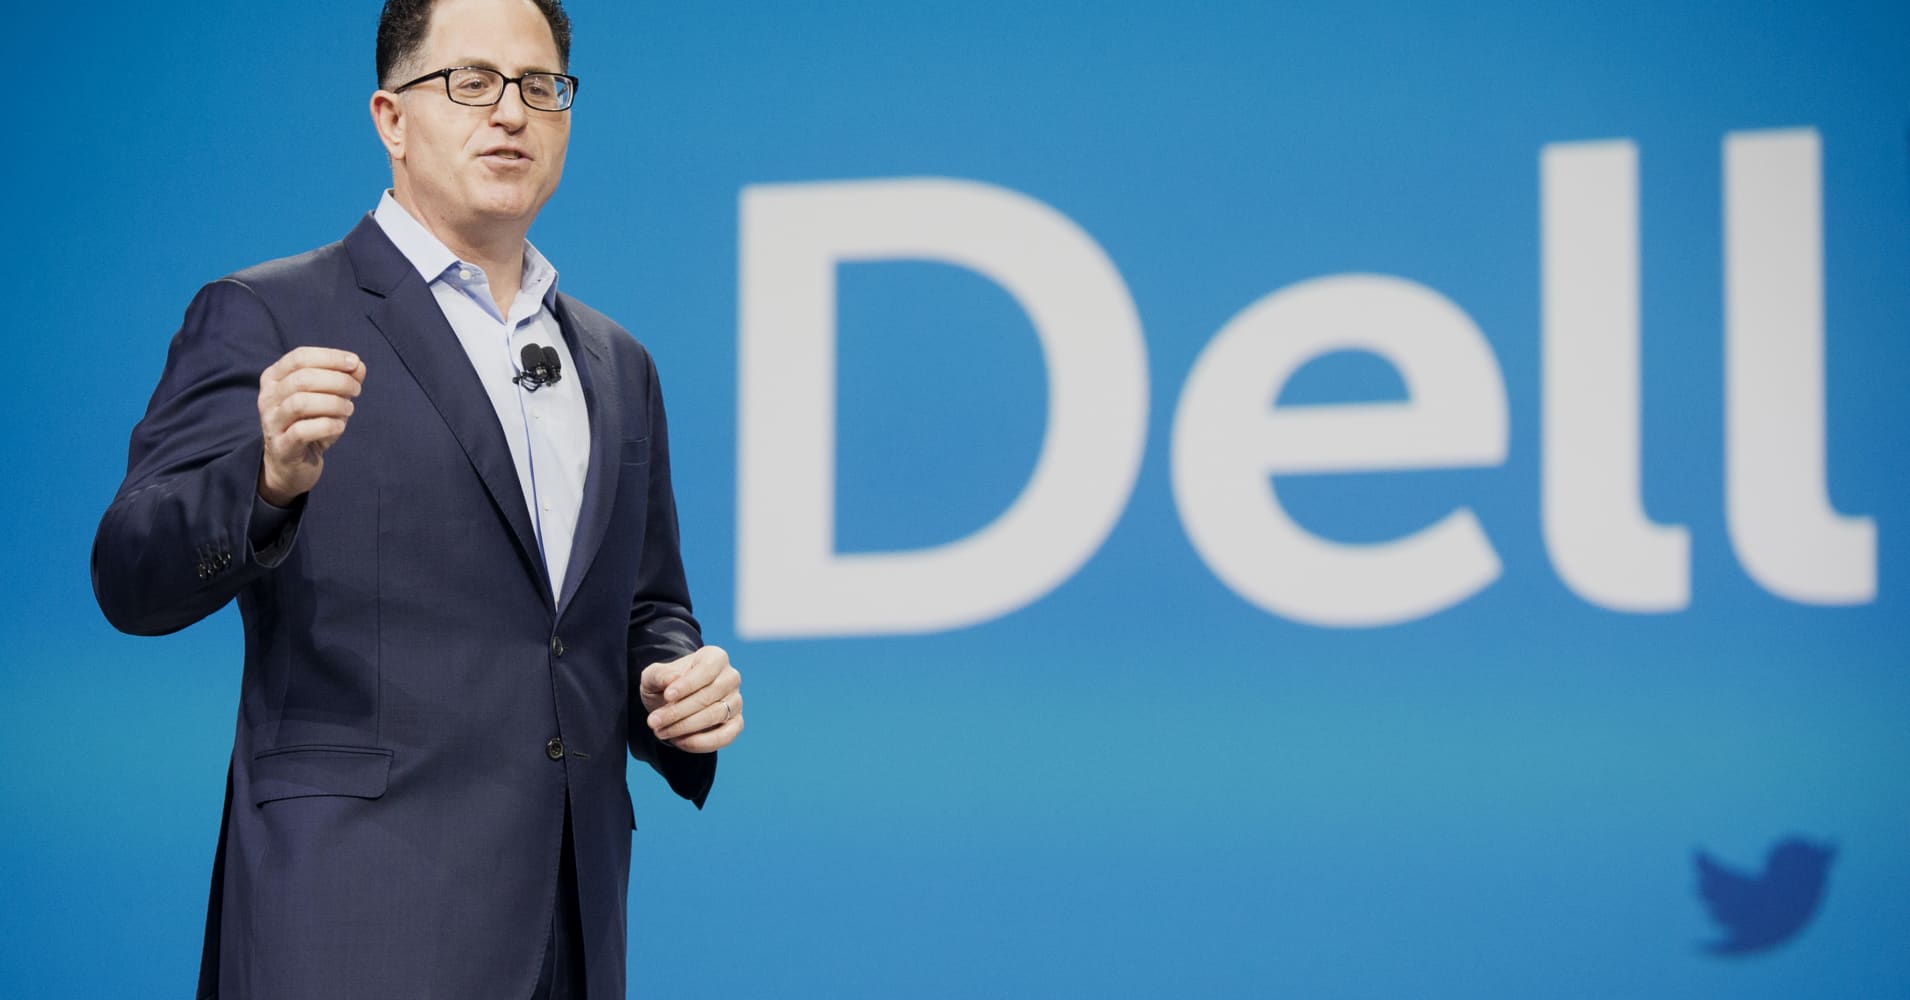 dell shares soar 15% after beating earnings expectations, cites rising demand for ai servers